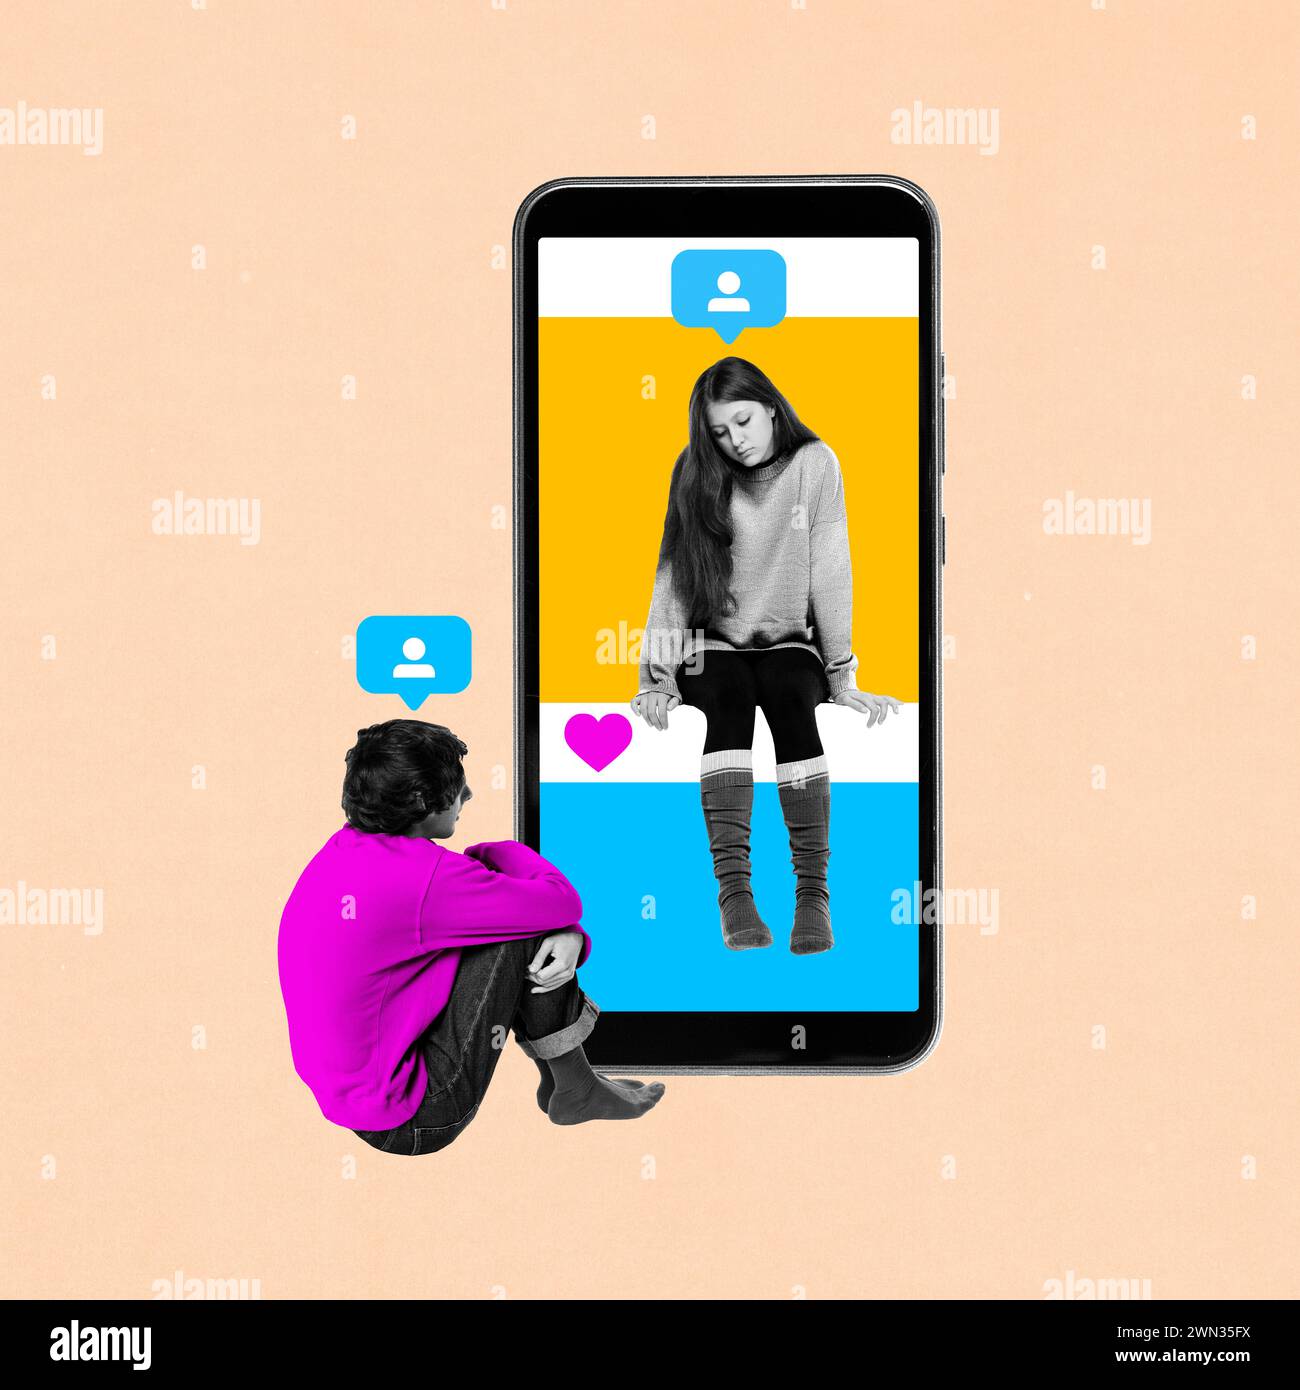 Man sitting and looking at woman on phone screen with comment icons. Contemporary art collage. Online relationship issues Stock Photo